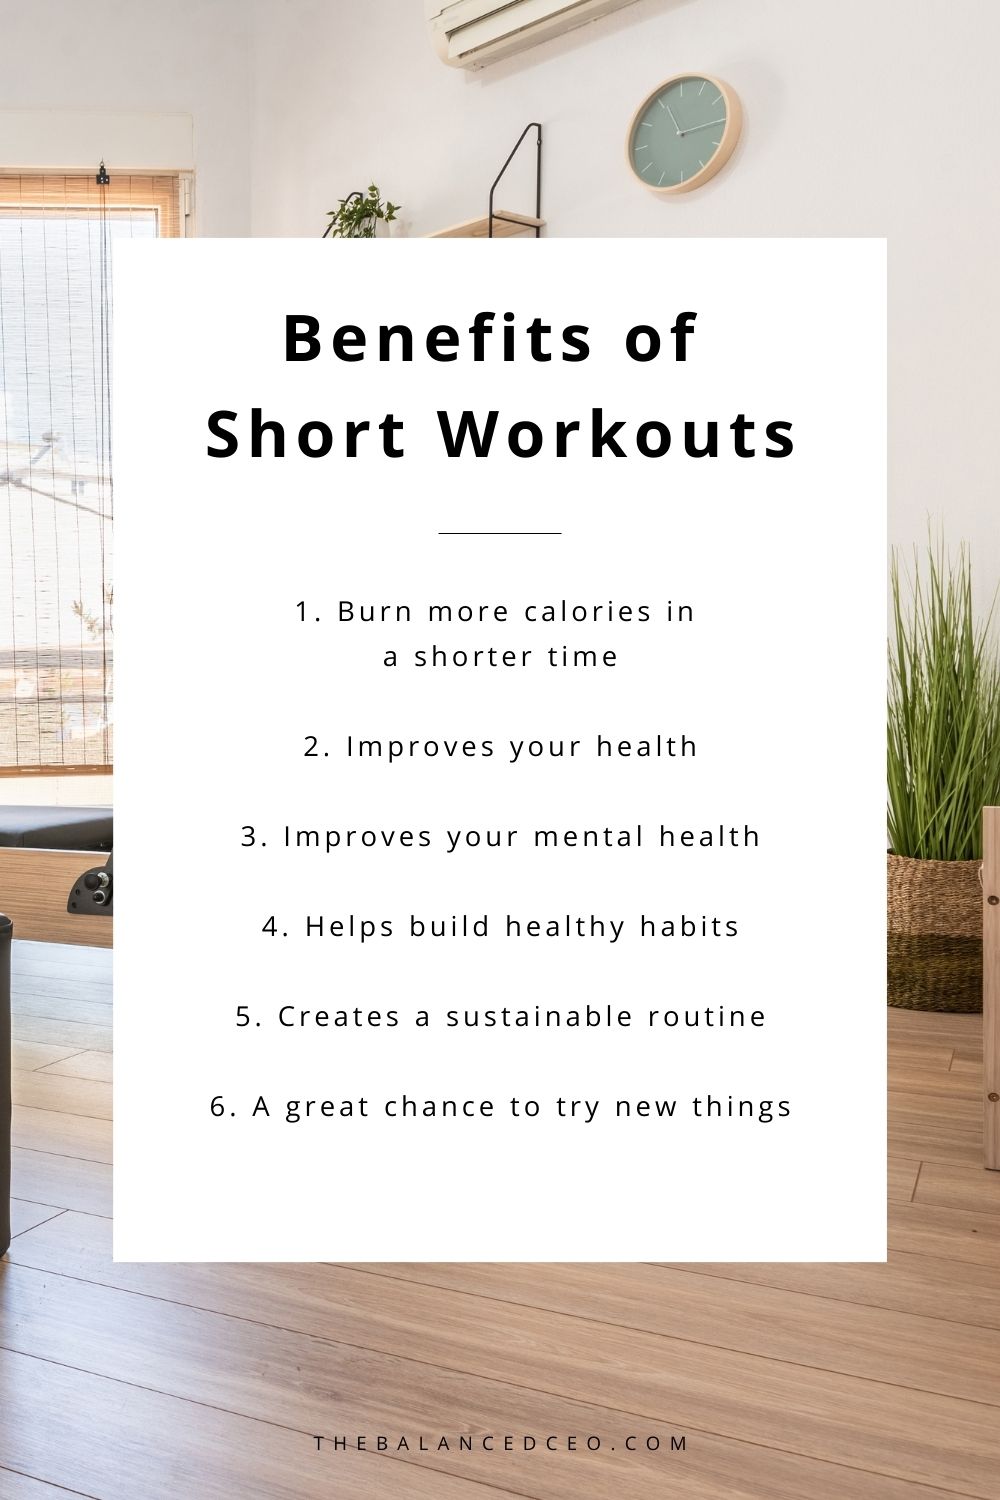 Benefits of Short Workouts